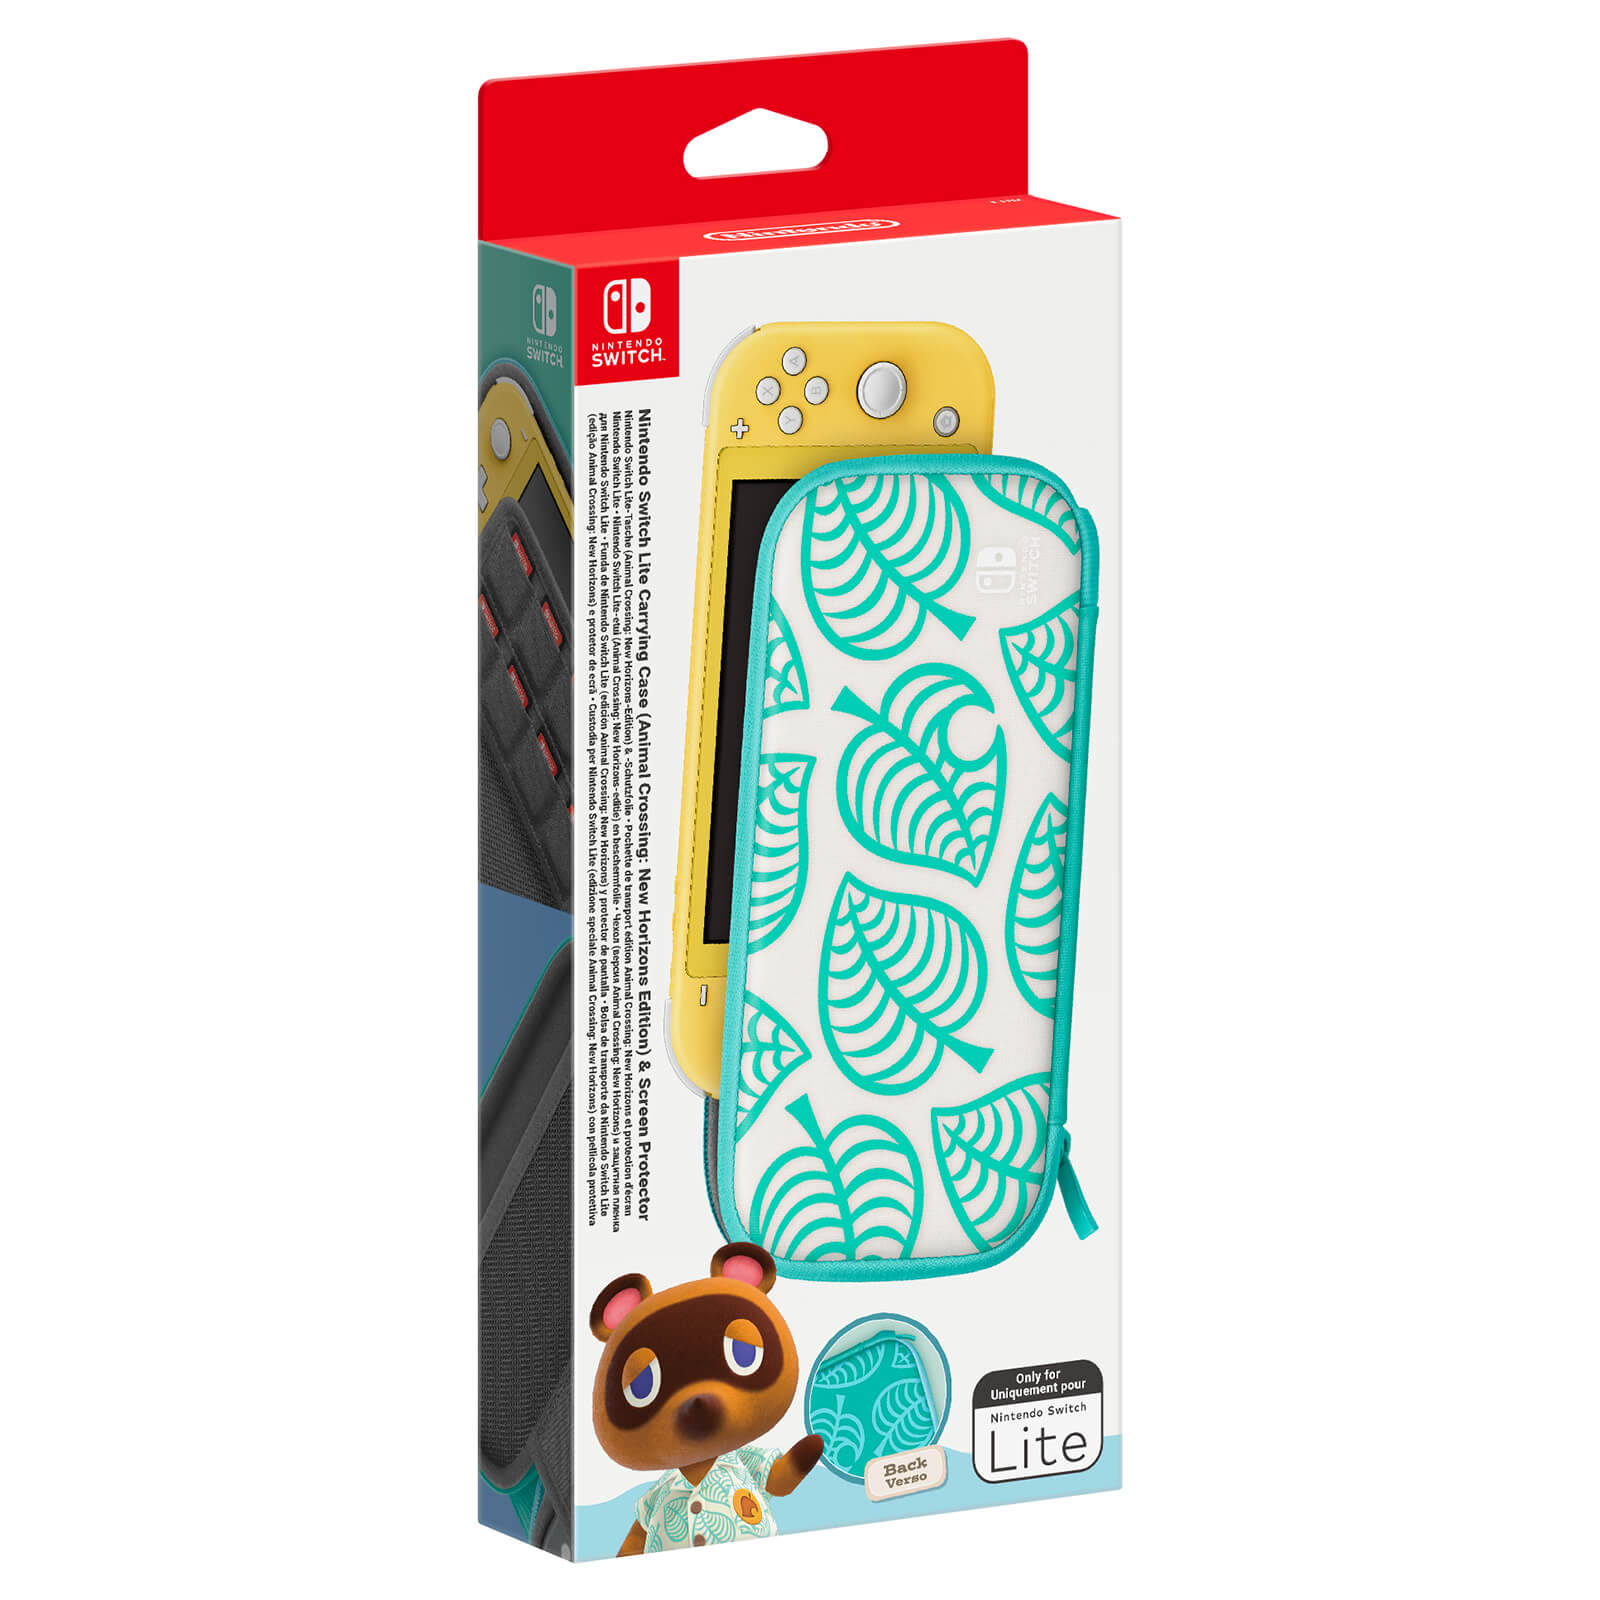 Animal crossing case switch lite